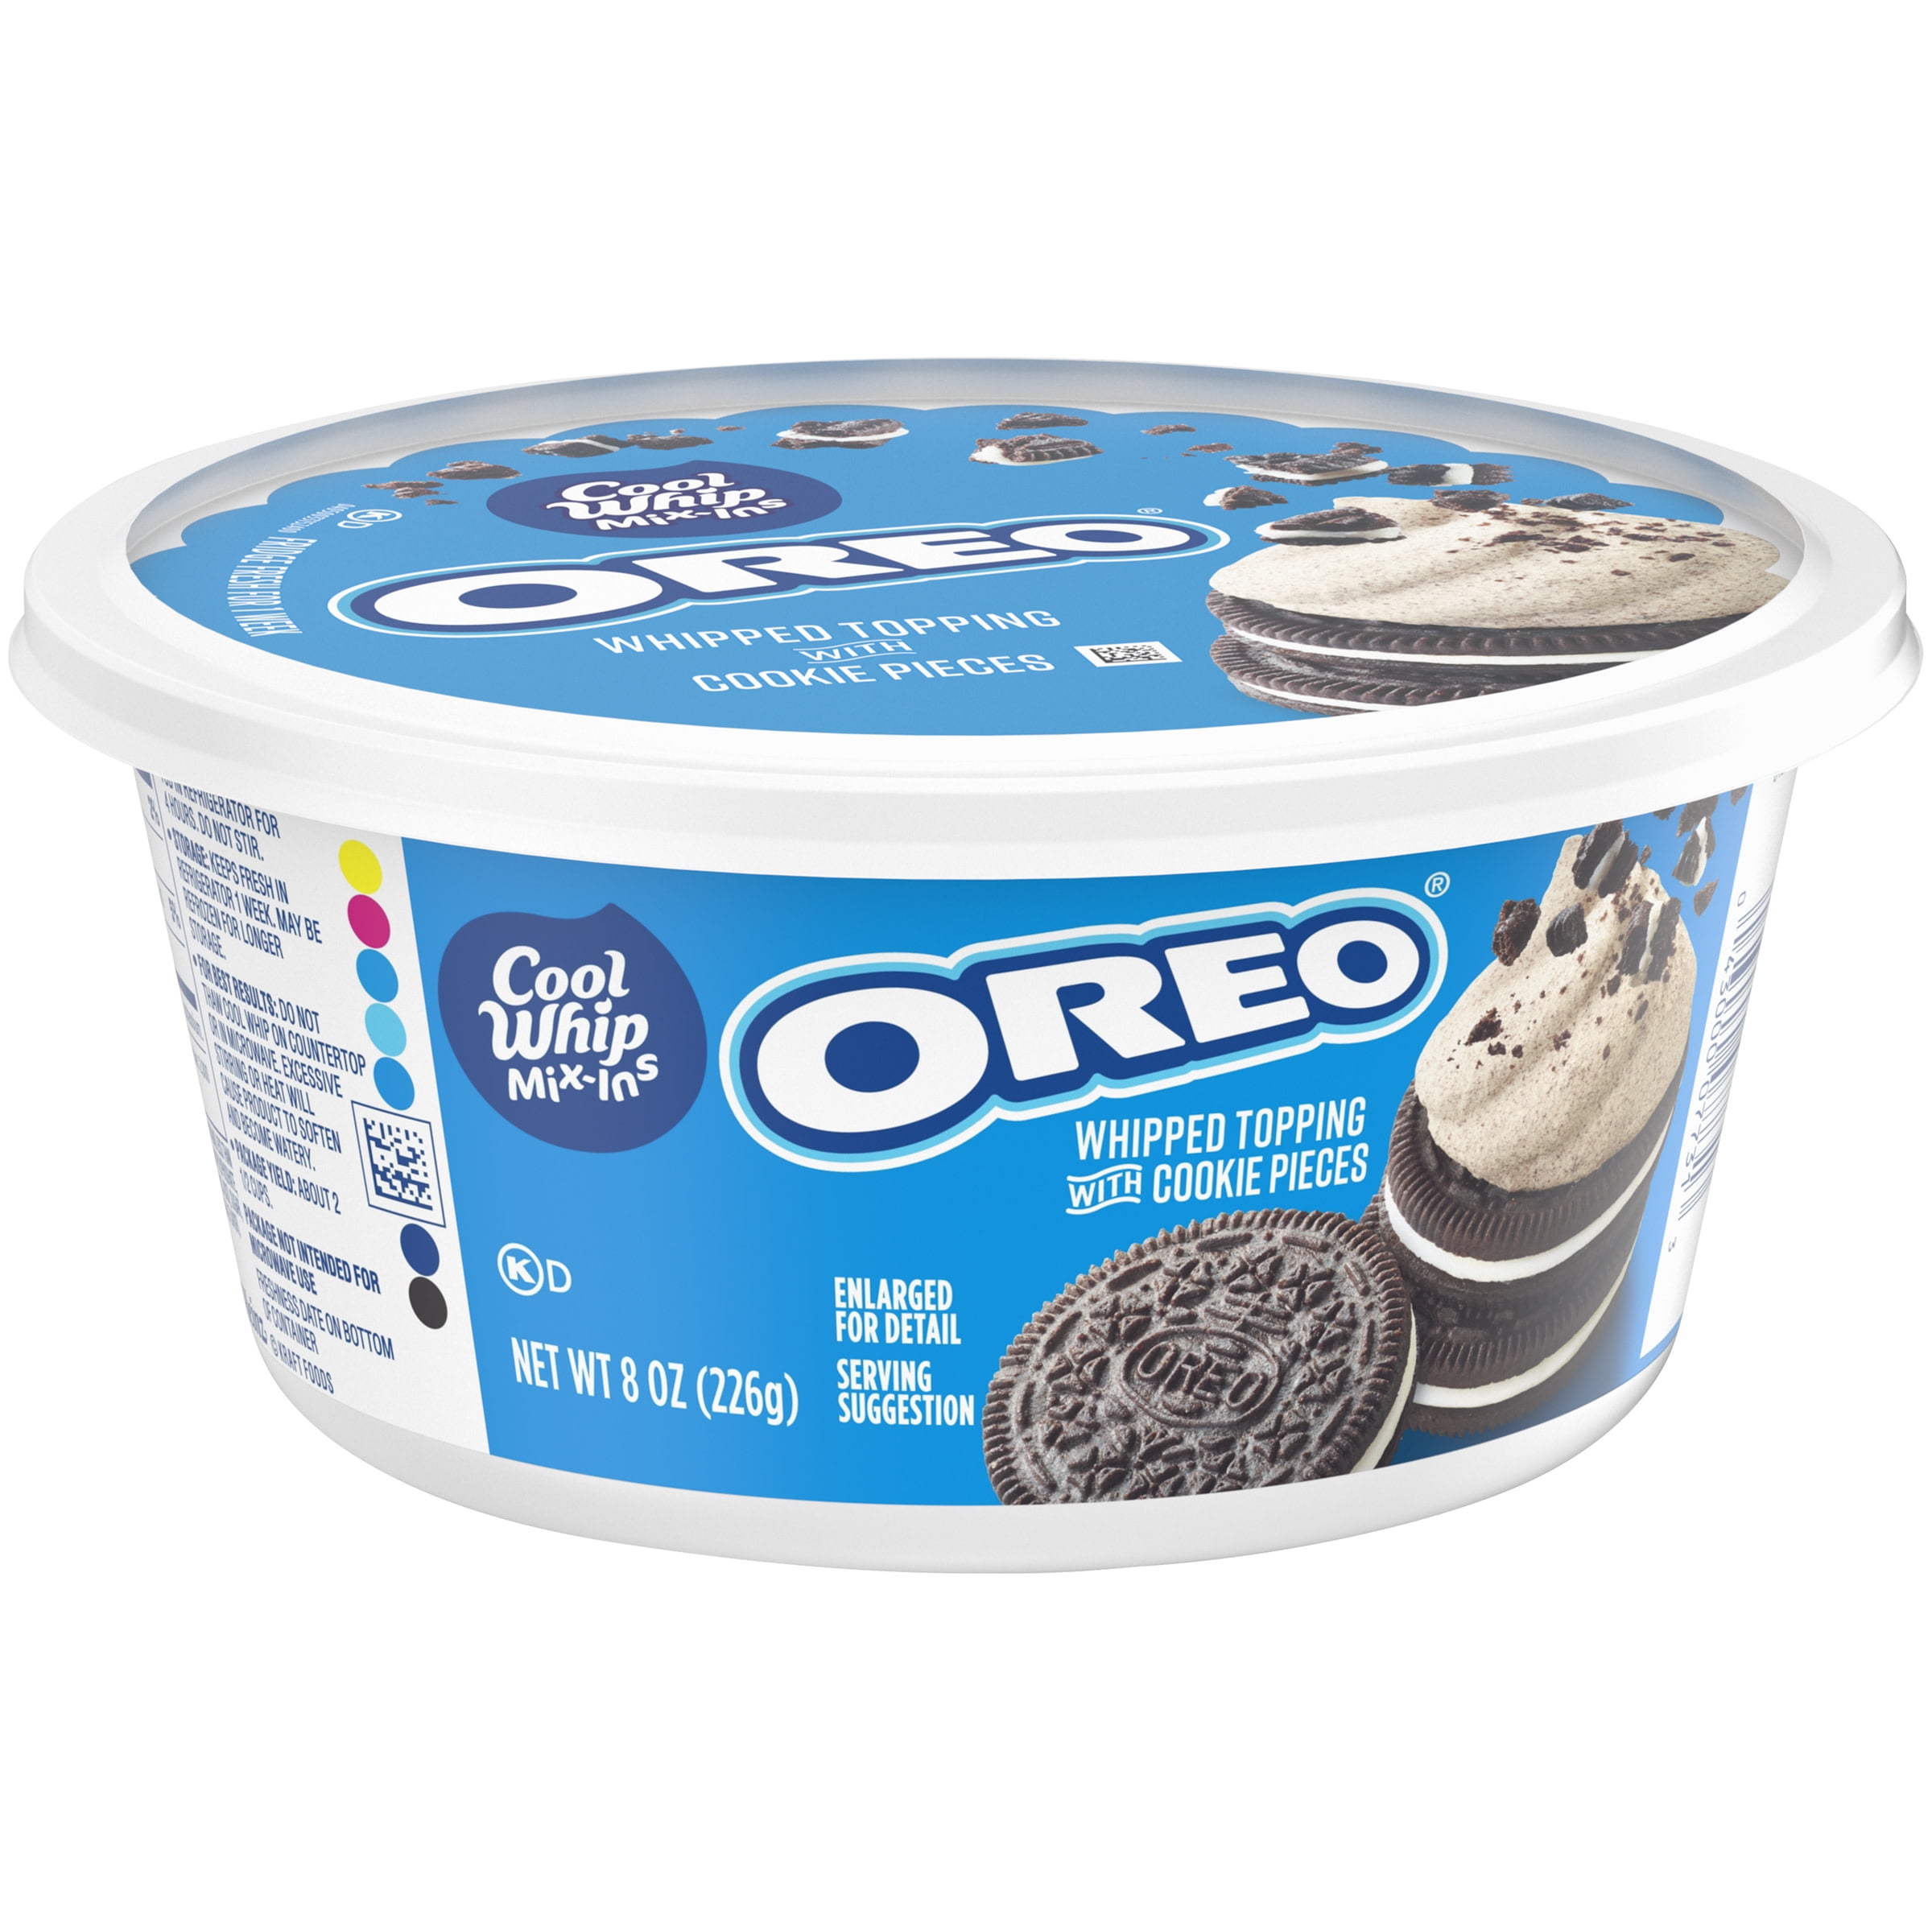 Cool Whip Mix-Ins Oreo Whipped Topping with Cookie Pieces, 8 oz Tub Walmart.com